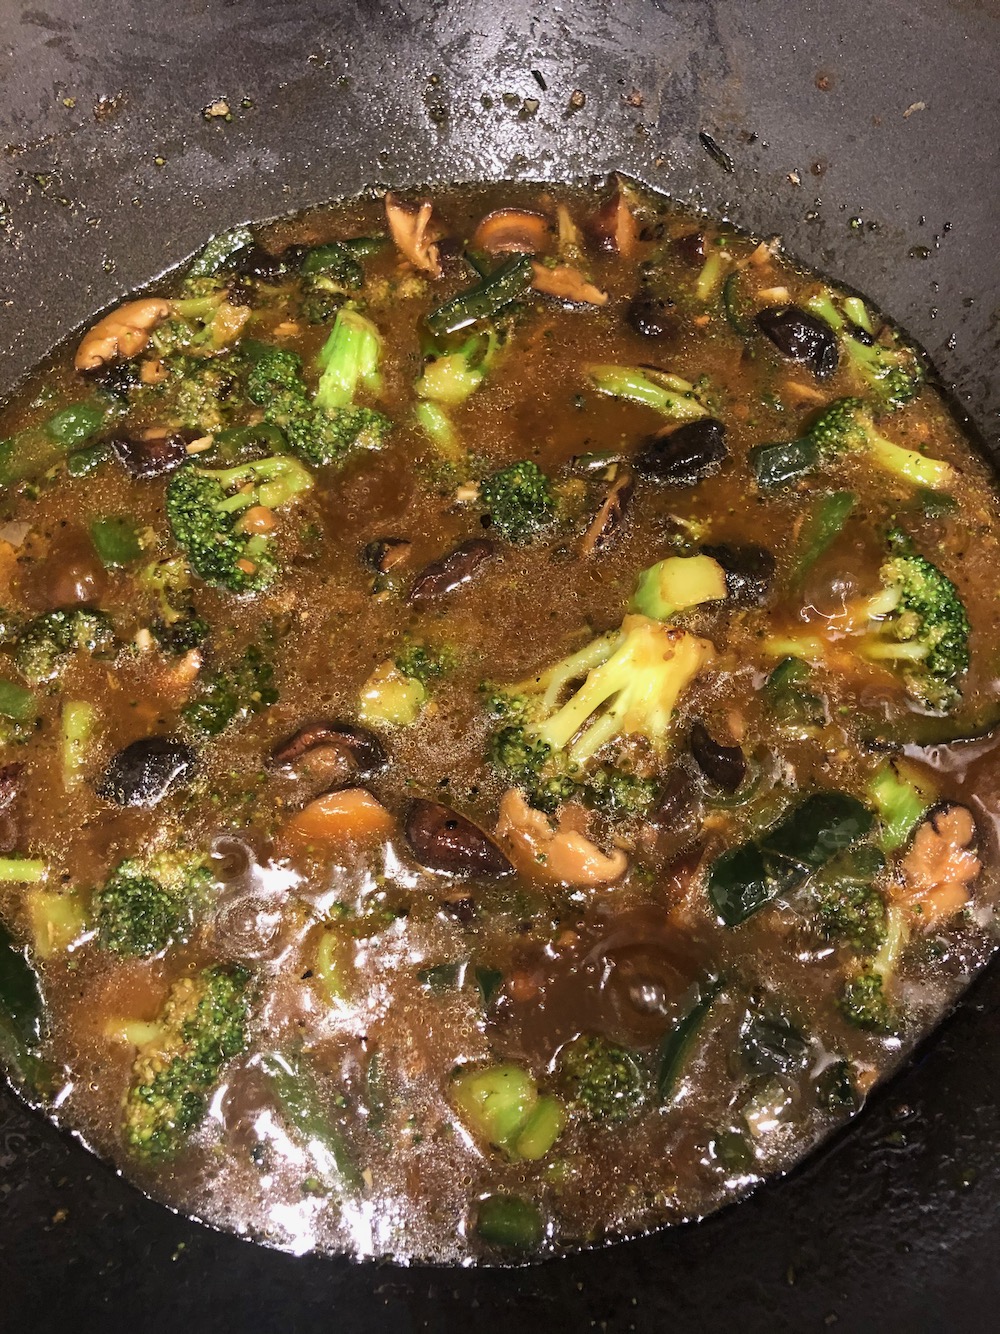 Simmer that sauce for the tofu garlic lo mein.